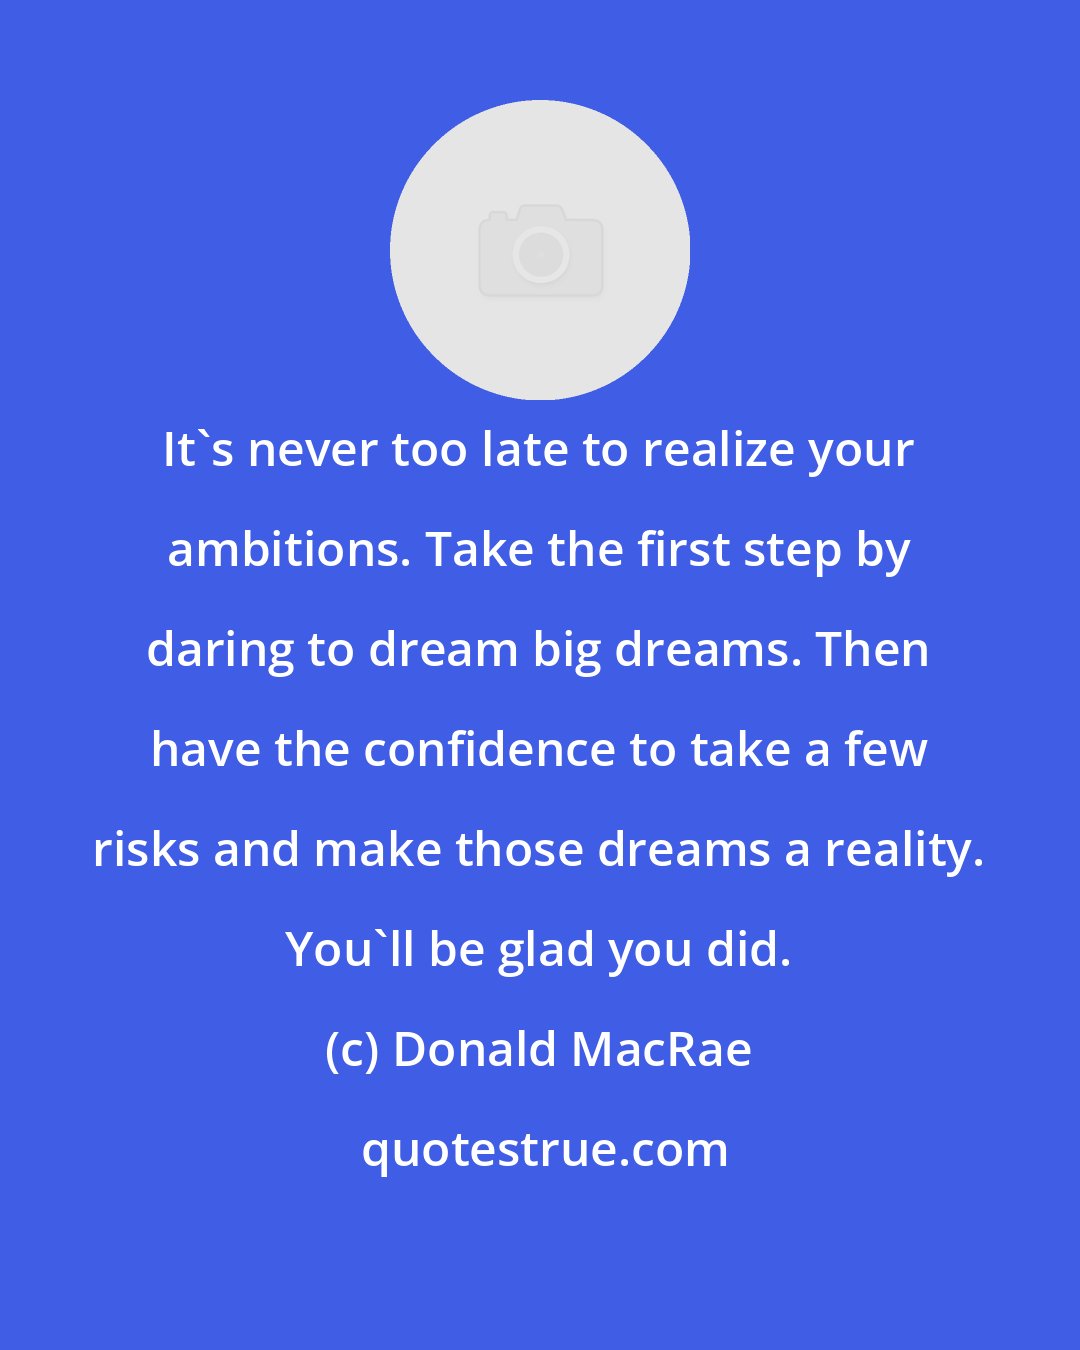 Donald MacRae: It's never too late to realize your ambitions. Take the first step by daring to dream big dreams. Then have the confidence to take a few risks and make those dreams a reality. You'll be glad you did.